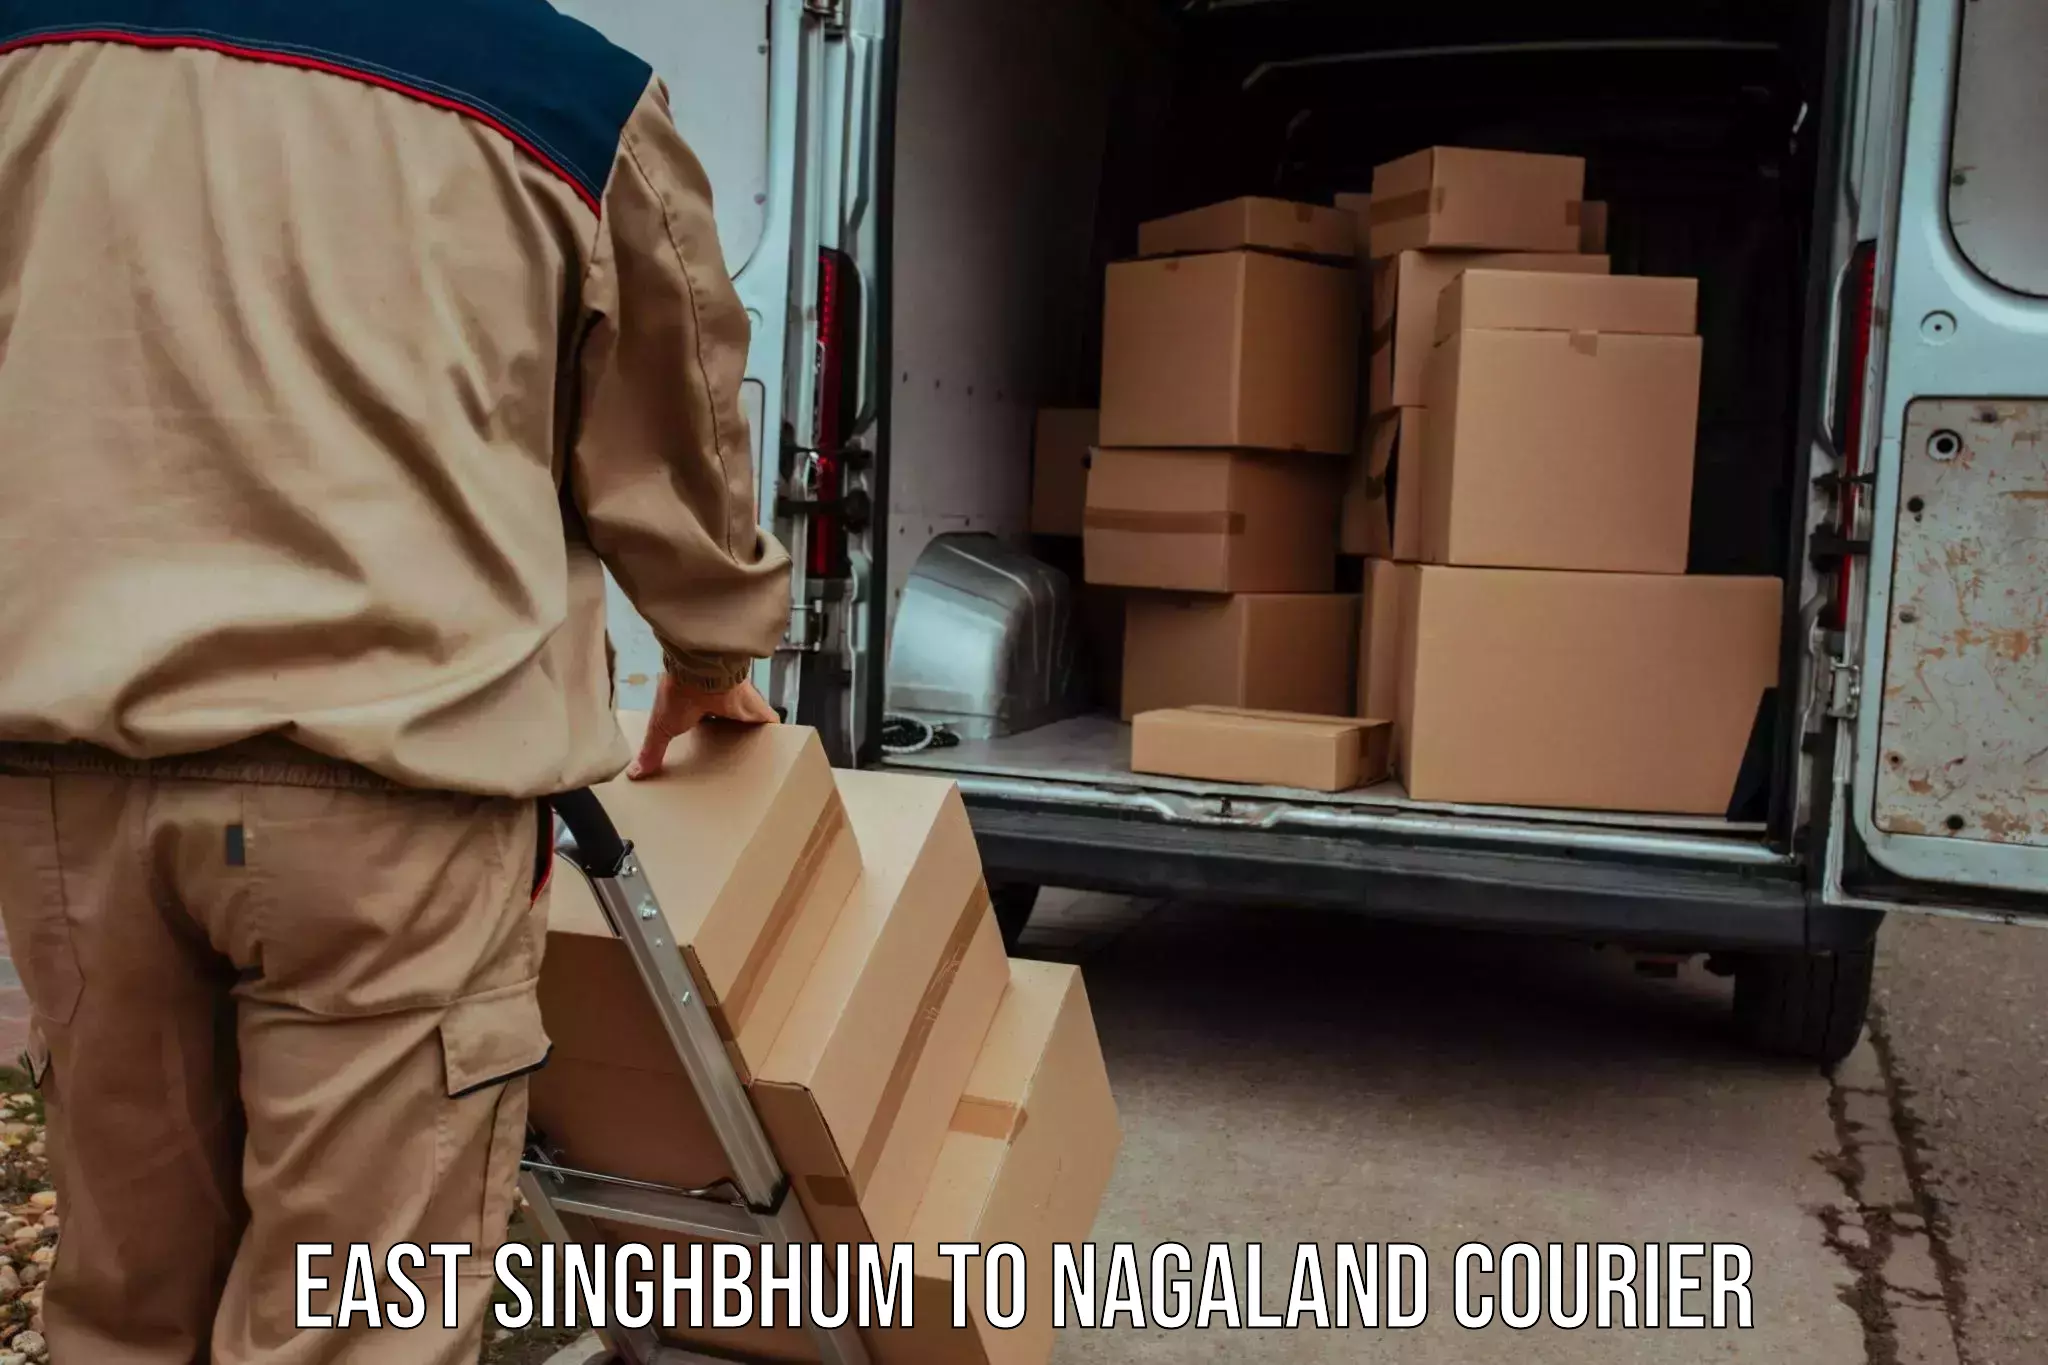 Express delivery capabilities East Singhbhum to Dimapur